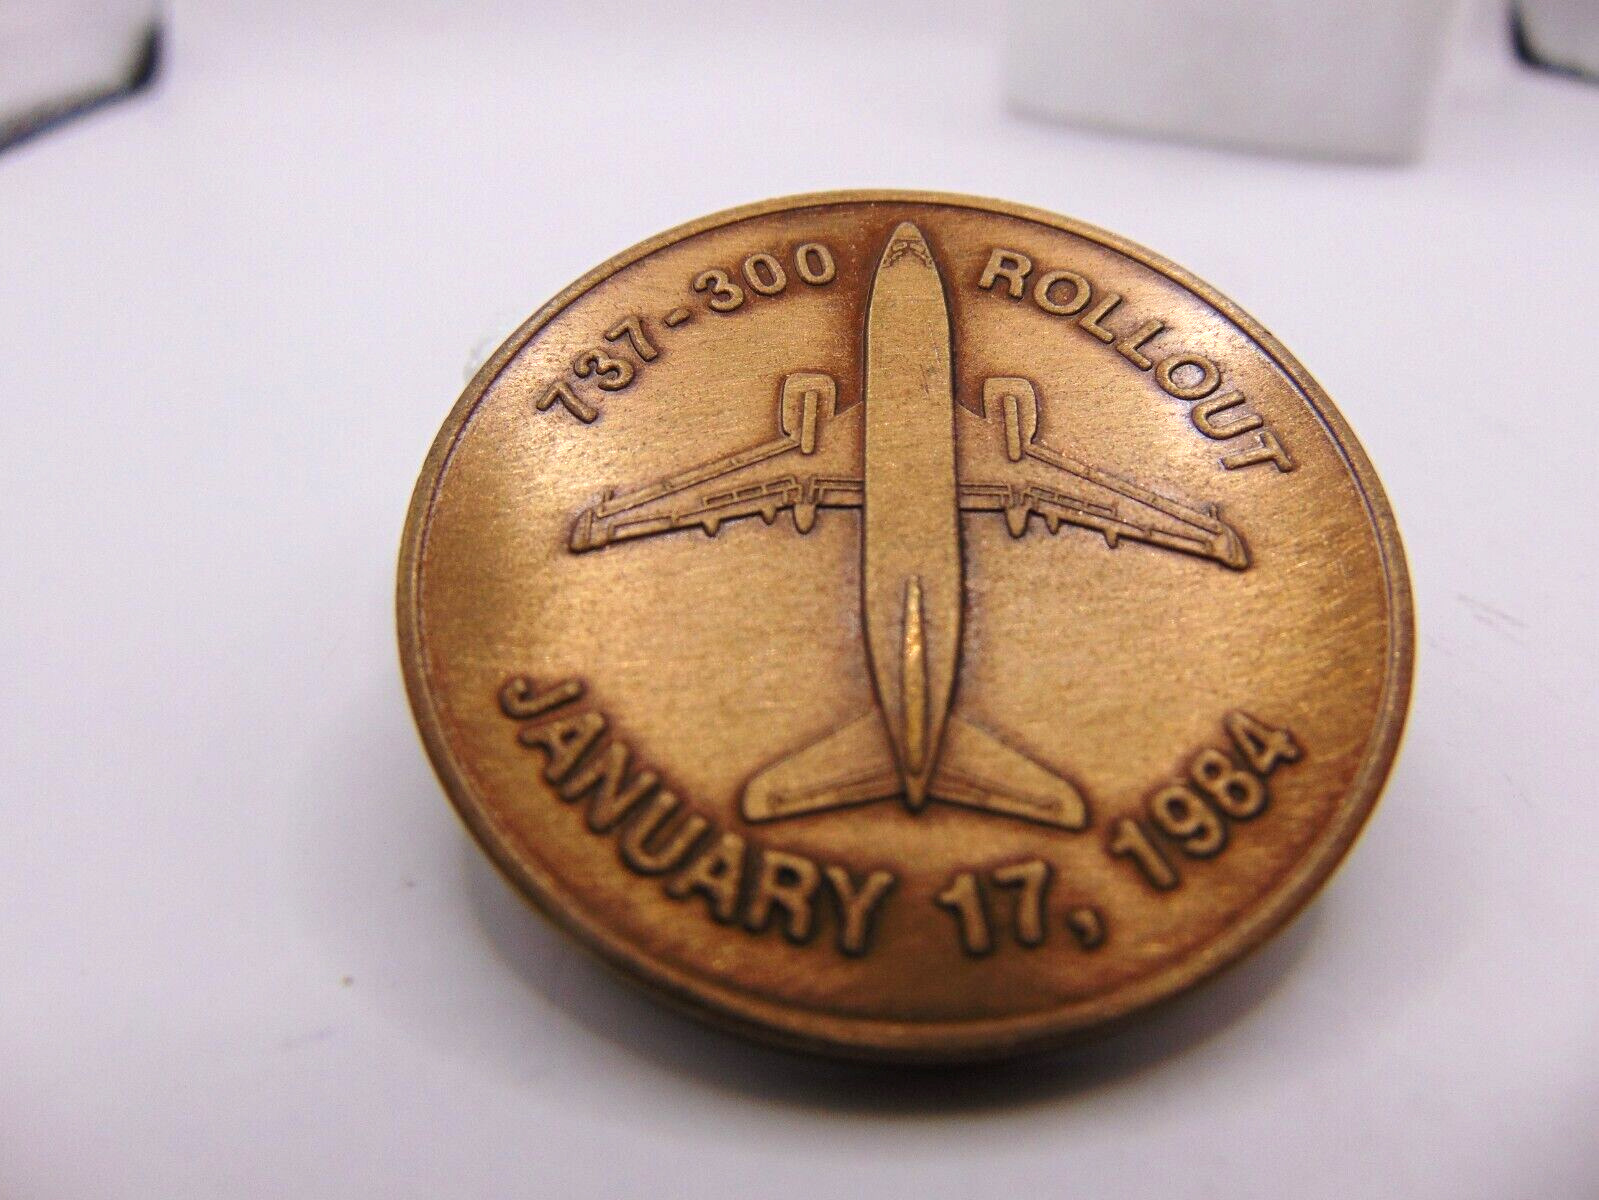 BOEING AIRPLANE METAL COIN COMMEMORATING THE ROLLOUT OF THE FIRST 737-300 1984